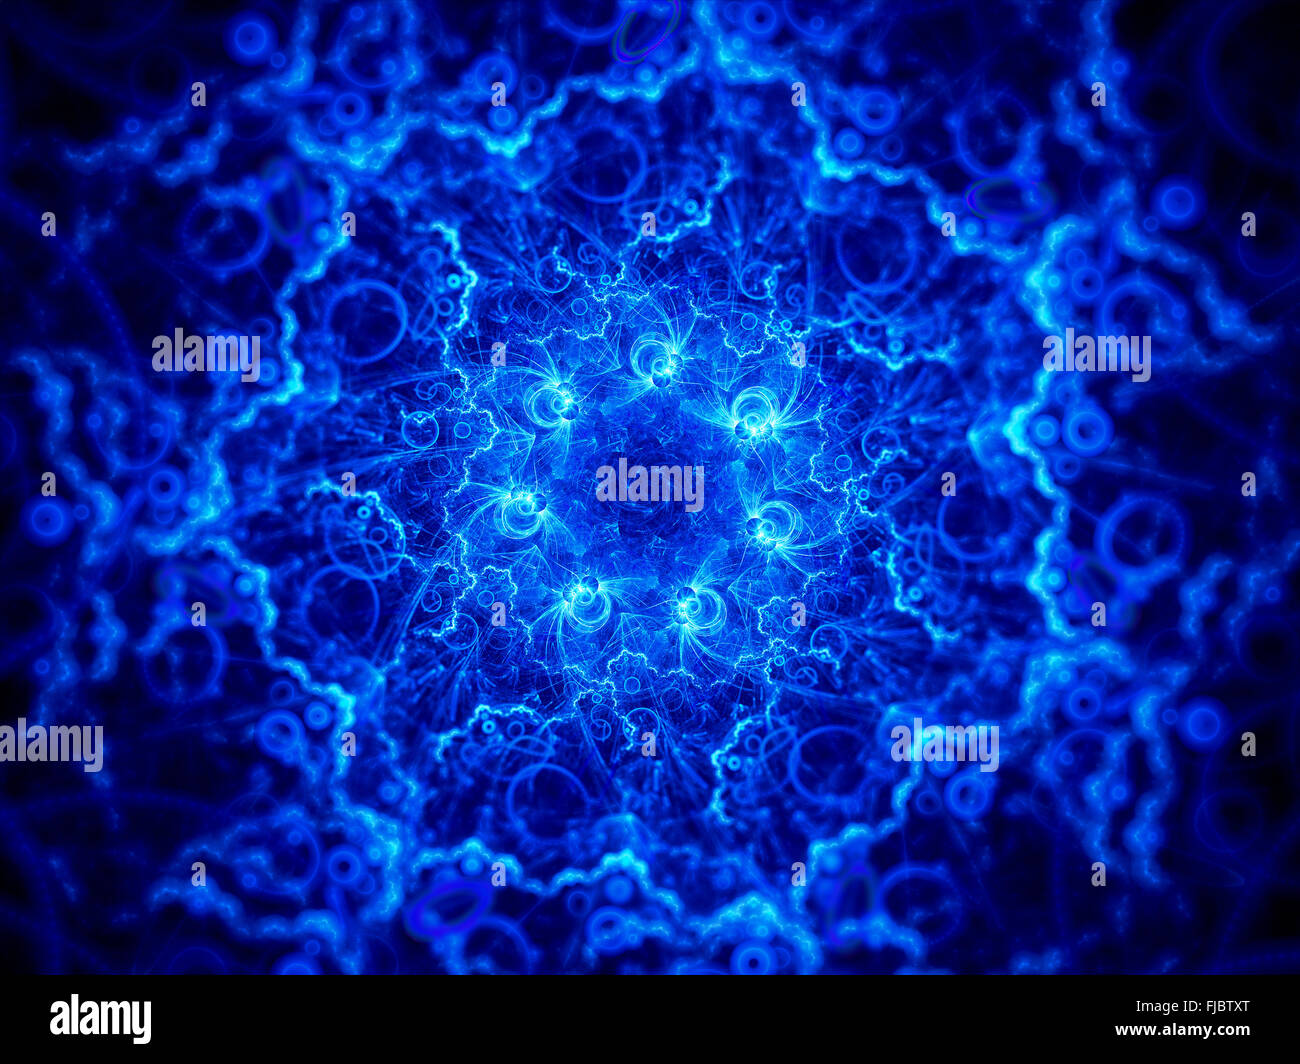 Colorful blue heaven, computer generated abstract background Stock Photo